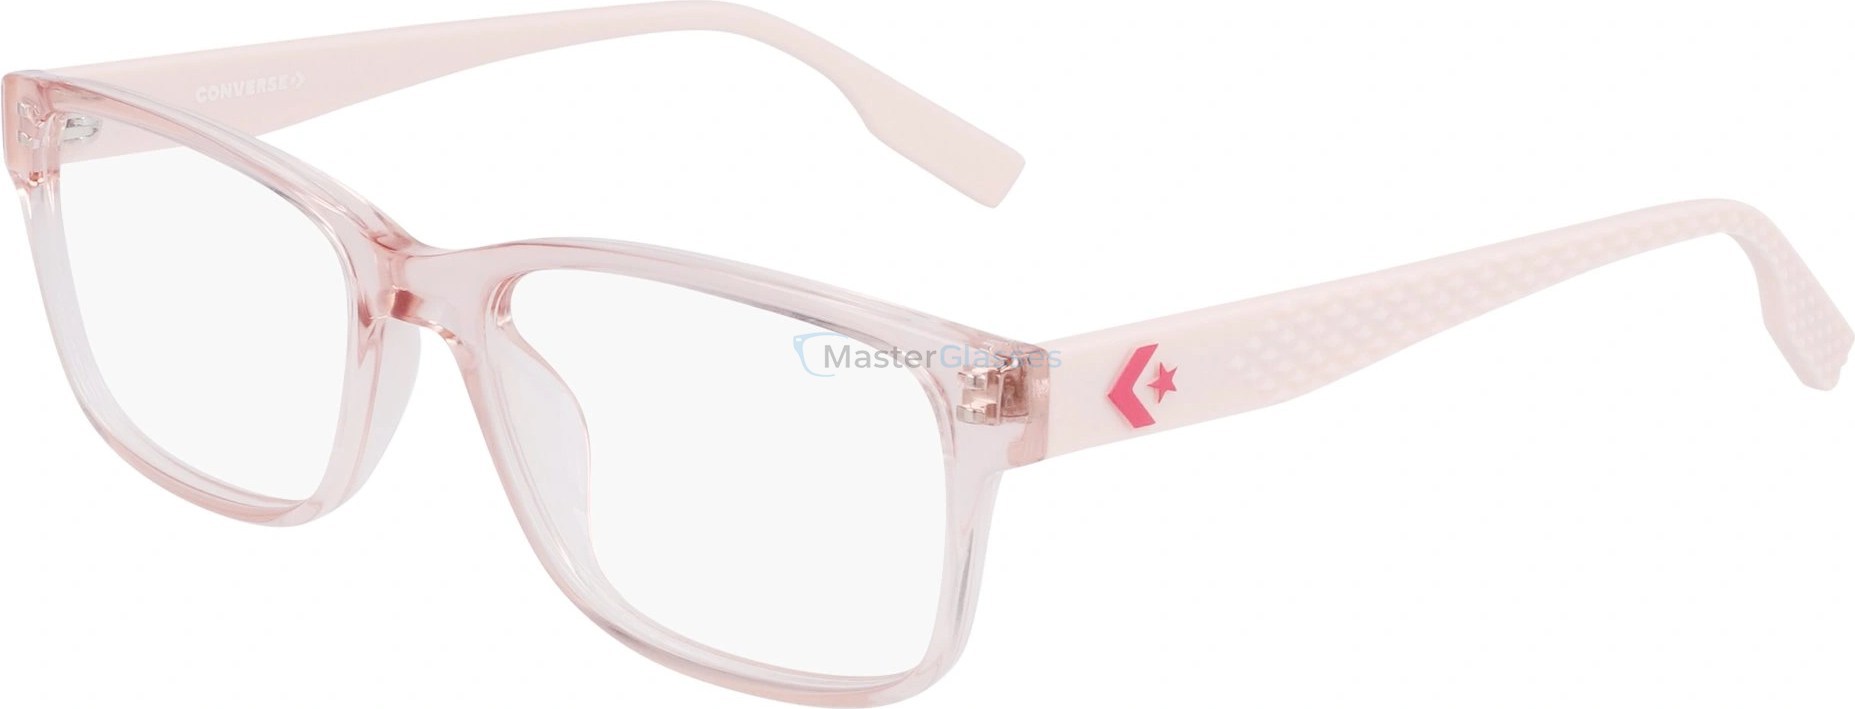  CONVERSE CV5062 682,  CRYSTAL BARELY ROSE, CLEAR